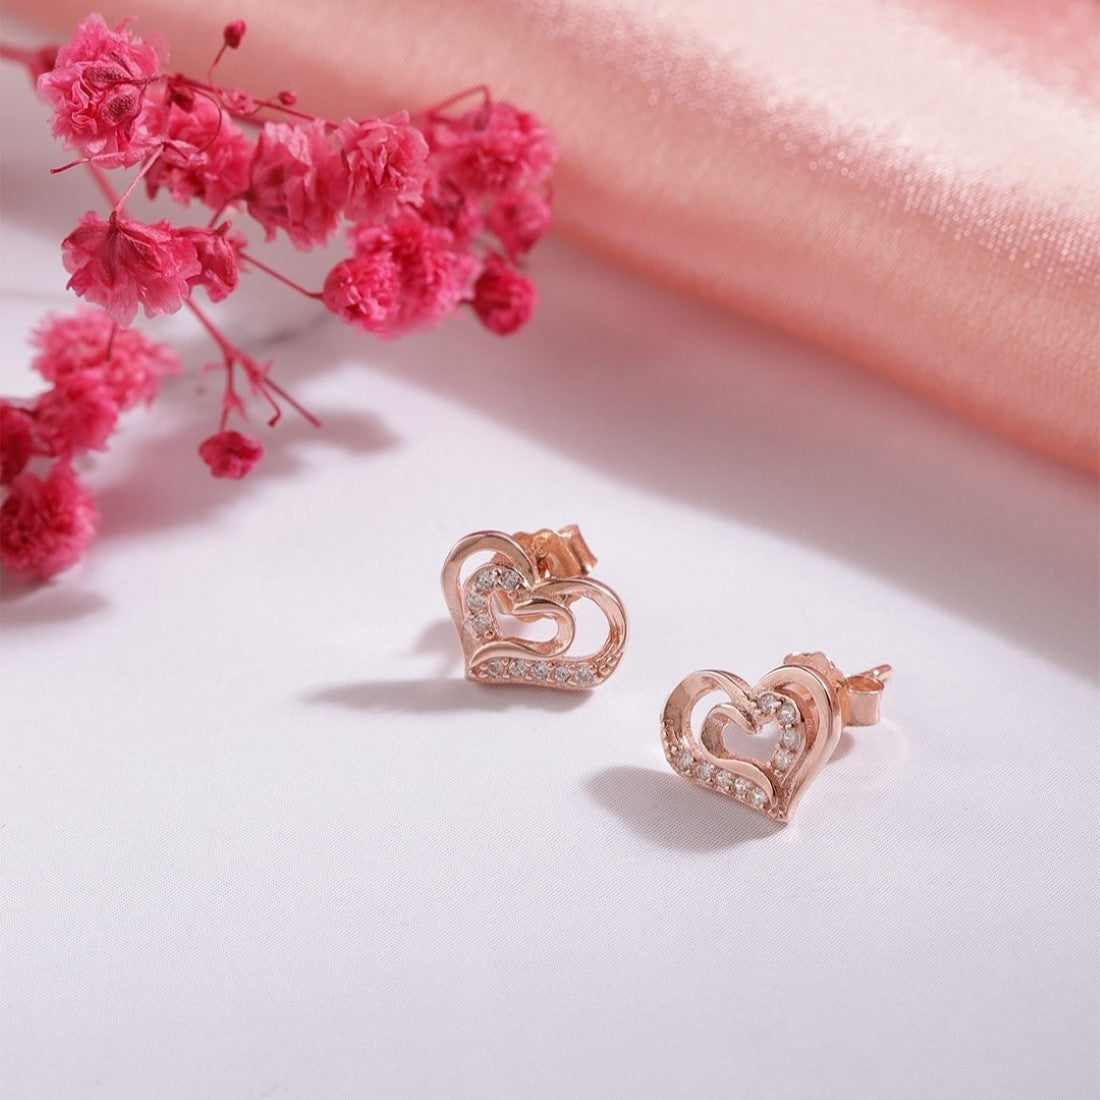 Heartfelt Radiance Rose Gold-Plated 925 Sterling Silver Earrings with CZ